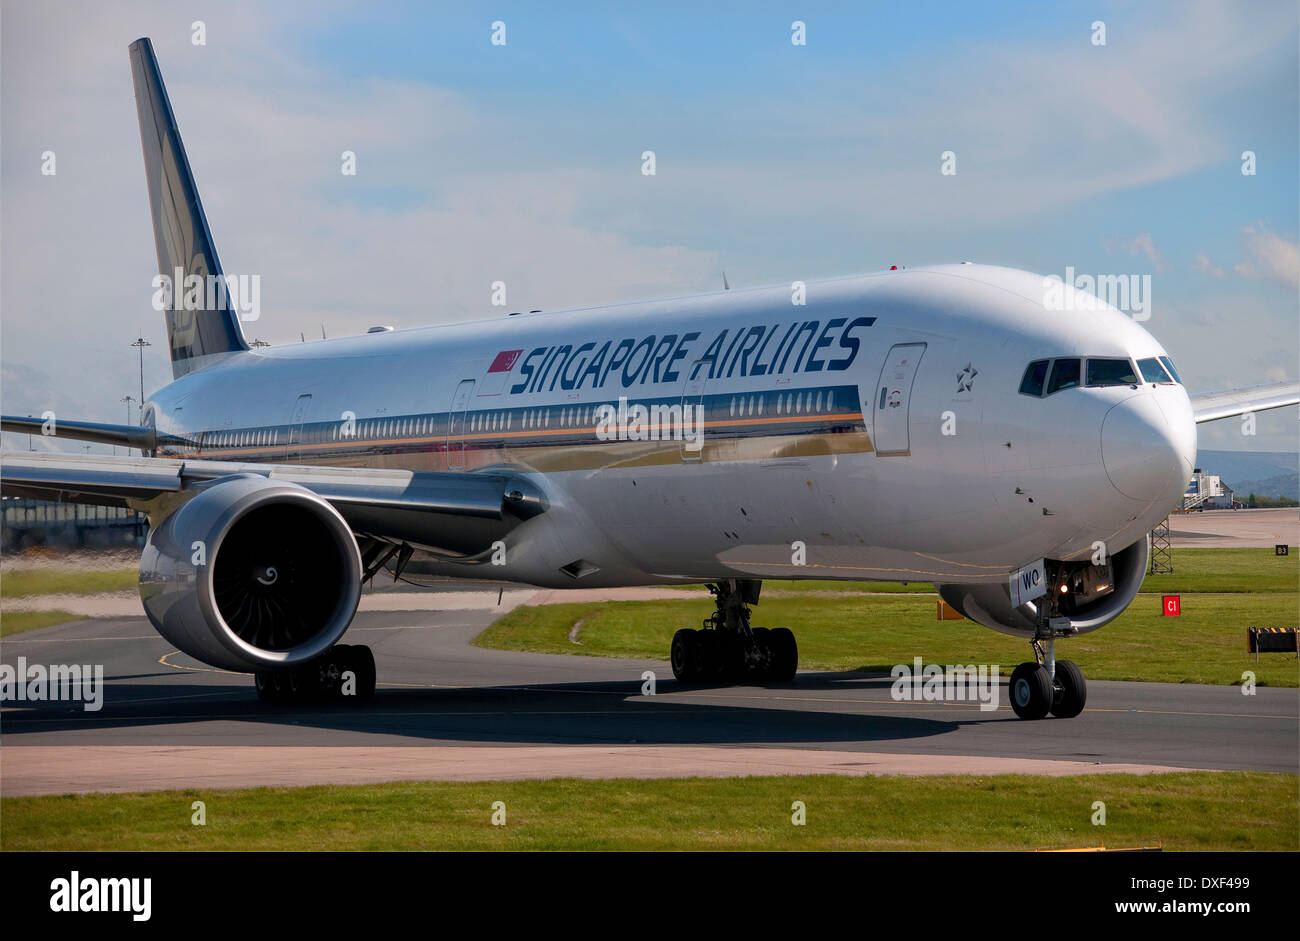 Singapore Airlines Boeing 777-300 taxis am Flughafen Manchester in England 2012 Stockfoto